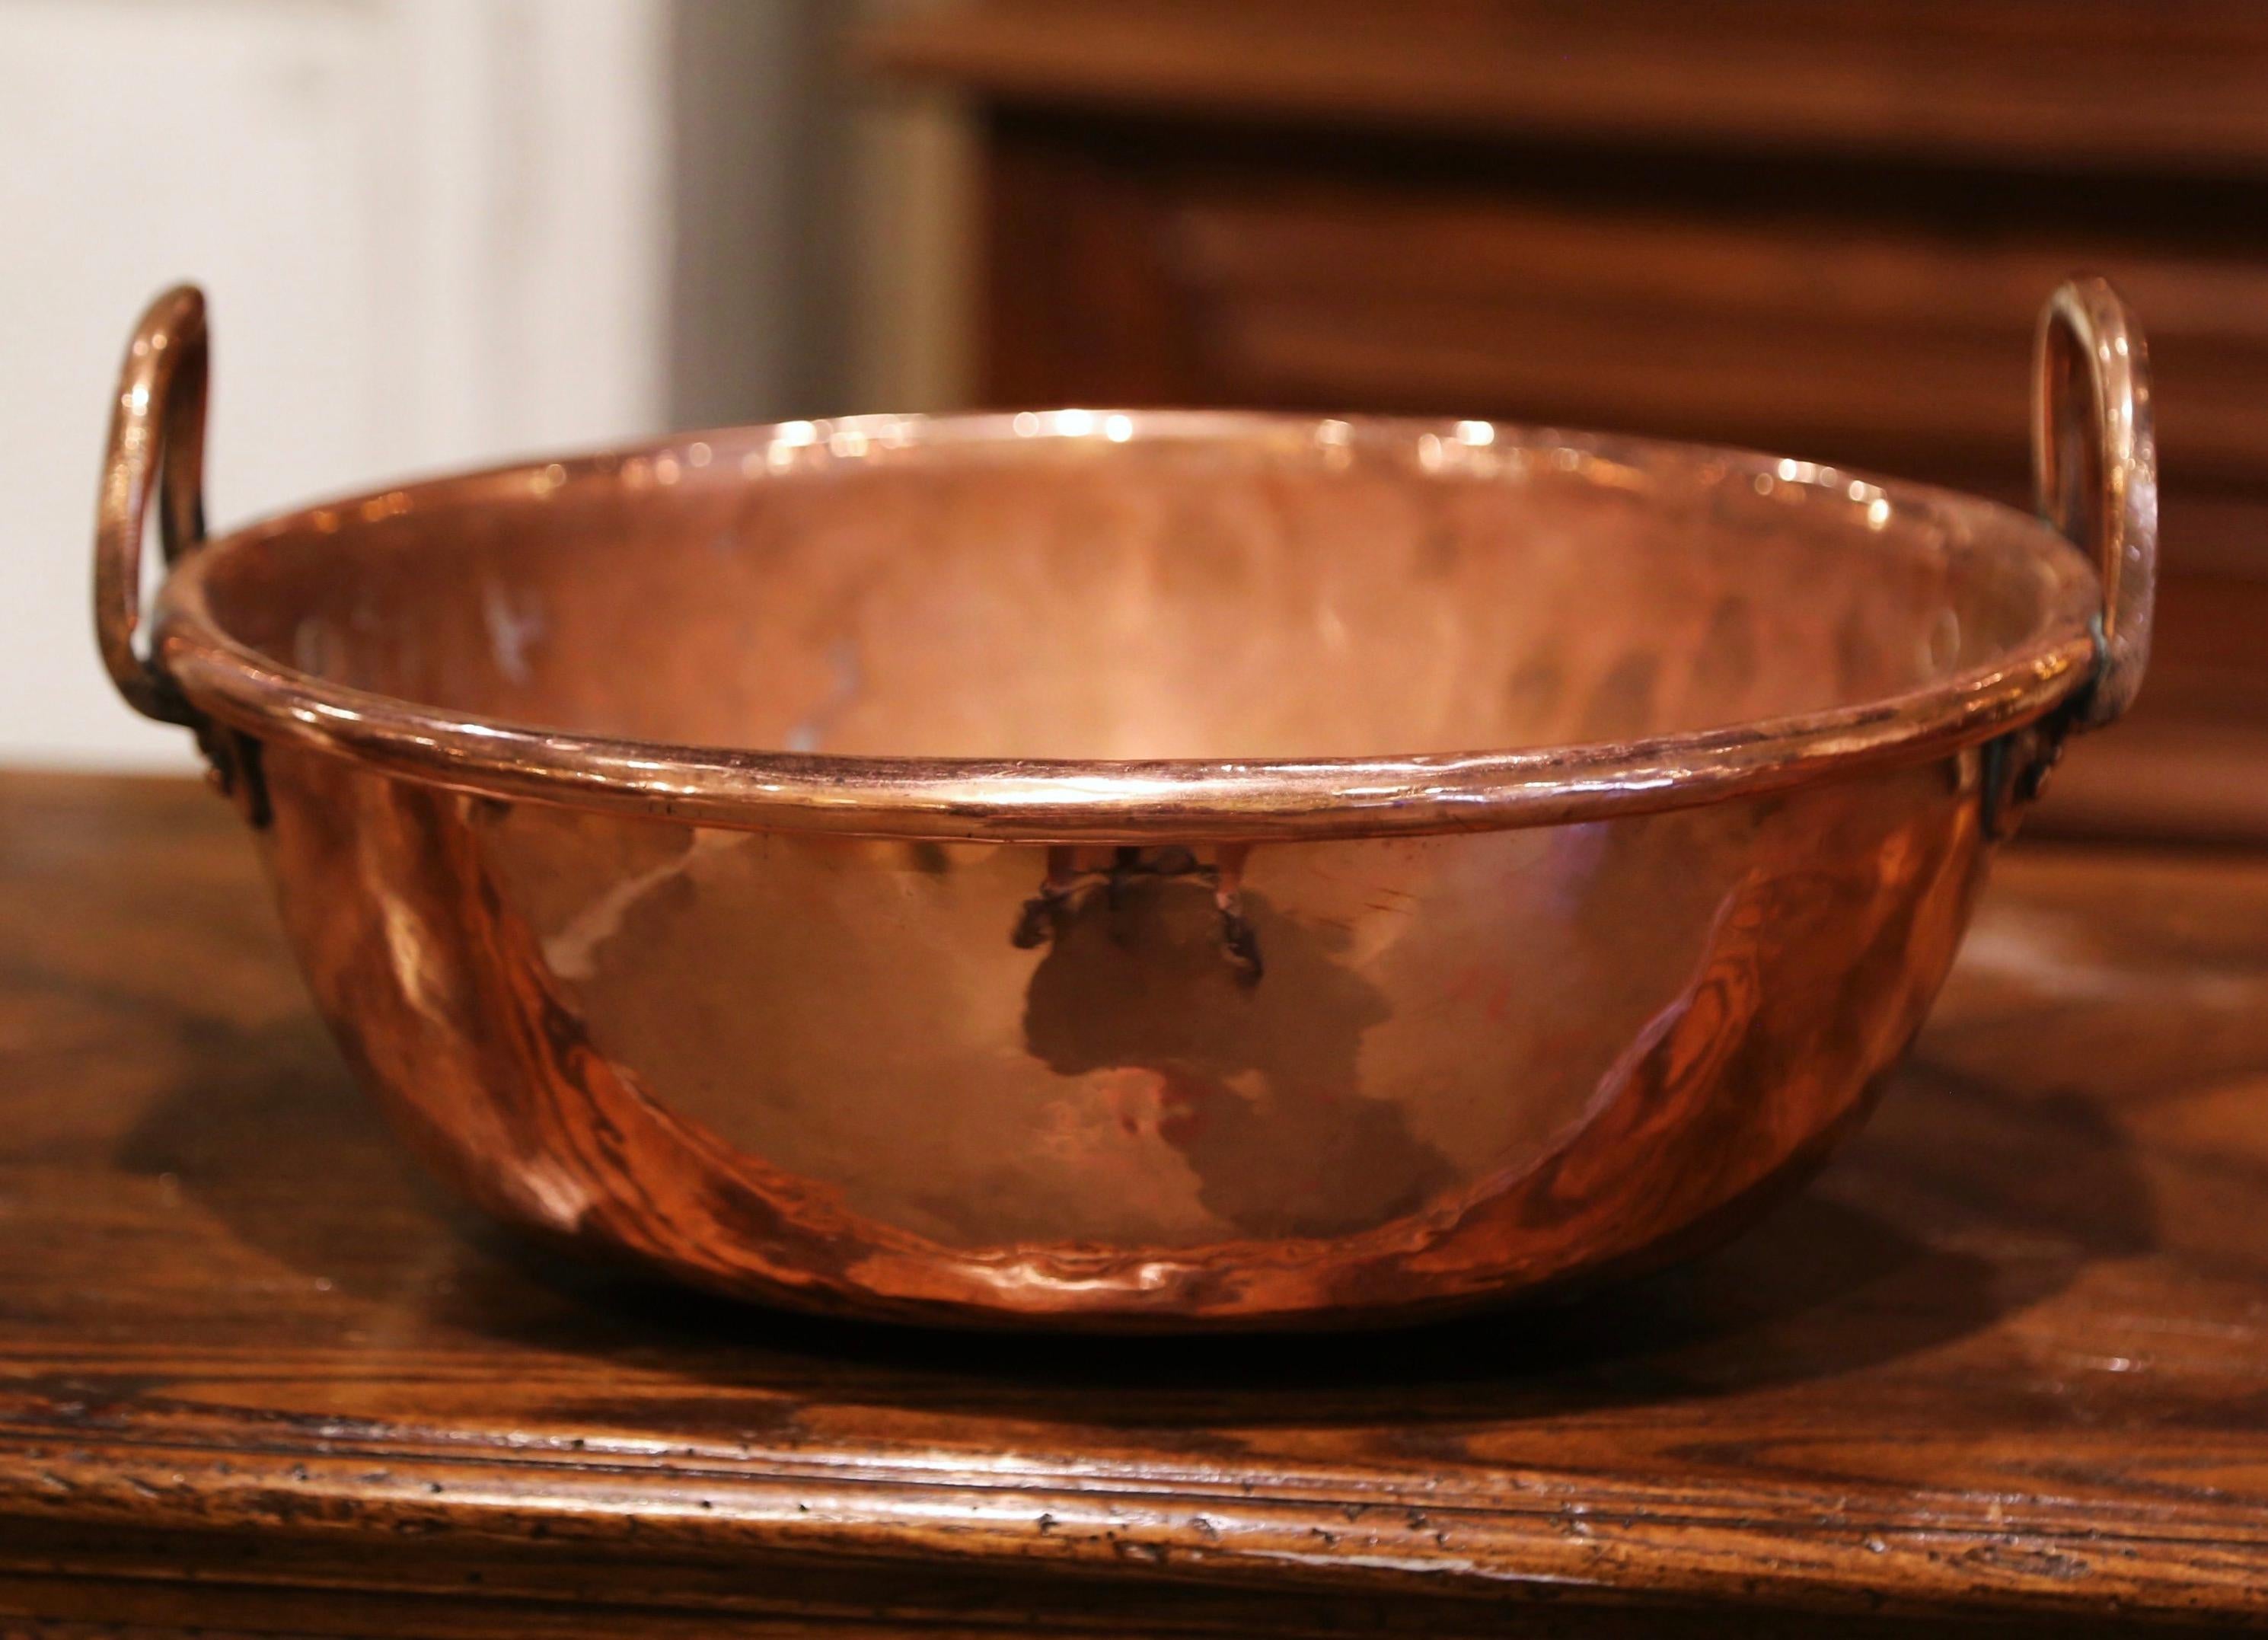 Bring an authentic French countryside touch to your kitchen with this large antique copper marmalade bowl. Crafted in Normandy, France, circa 1870, the decorative “Bassine a Confiture” (or jelly bowl) is round in shape and dressed with two brass